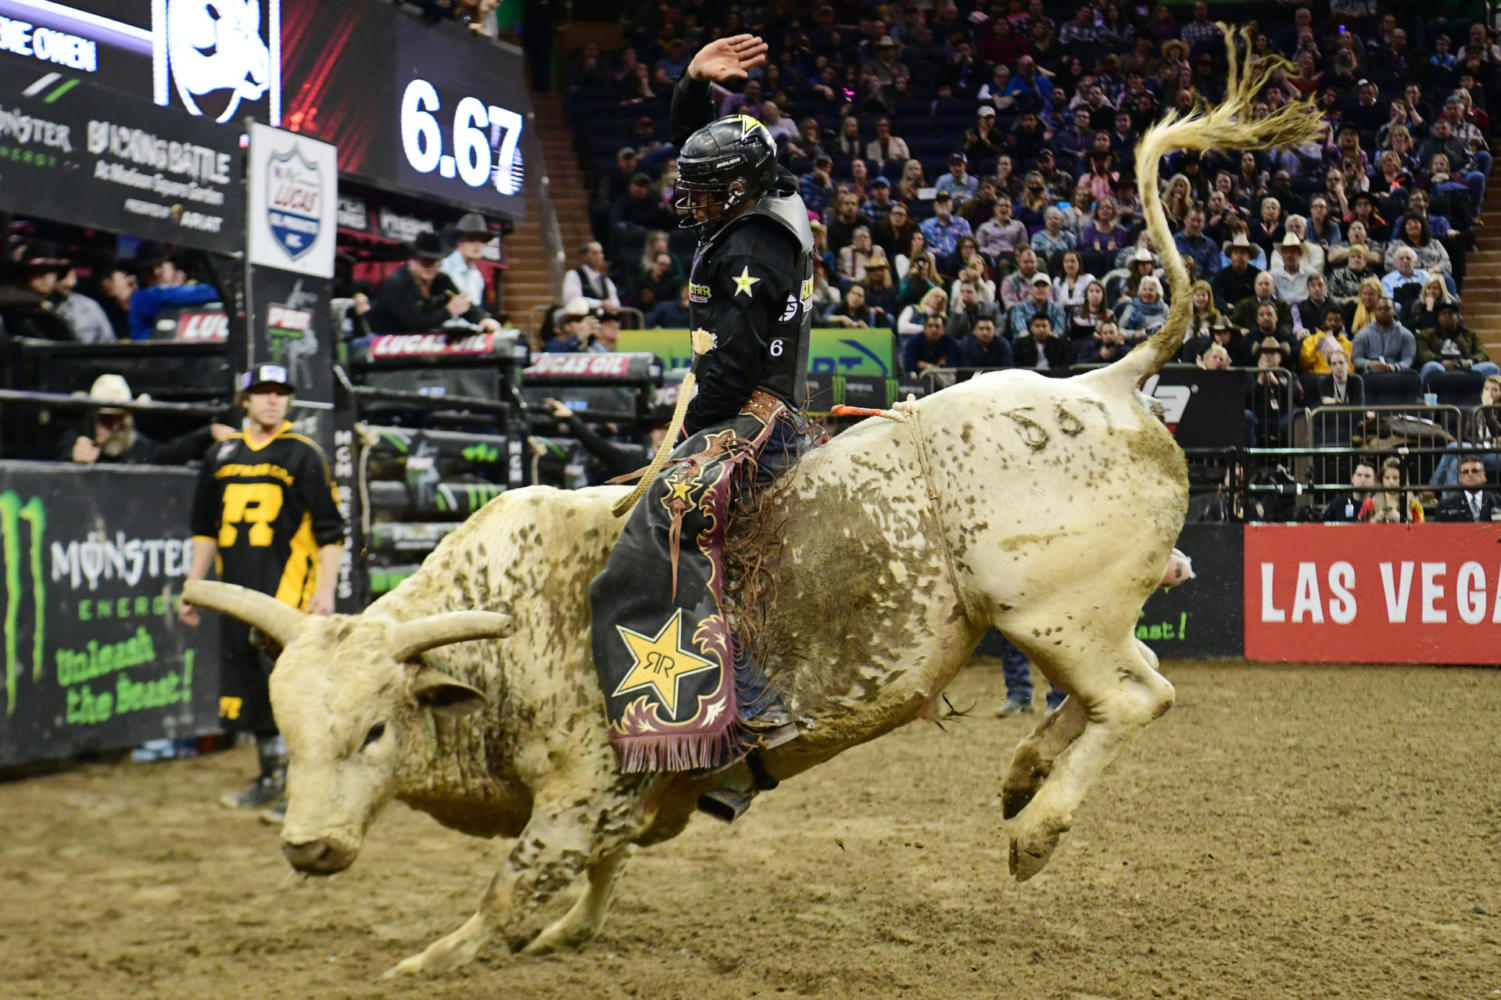 NEW YORK, NEW YORK - JANUARY 06: Luciano De Castro rides Lester Gills in the final round of the PBR Unleash the Beast bull riding event at Madison Square Garden on January 06, 2019 in New York City. (Photo by Sarah Stier/Getty Images)